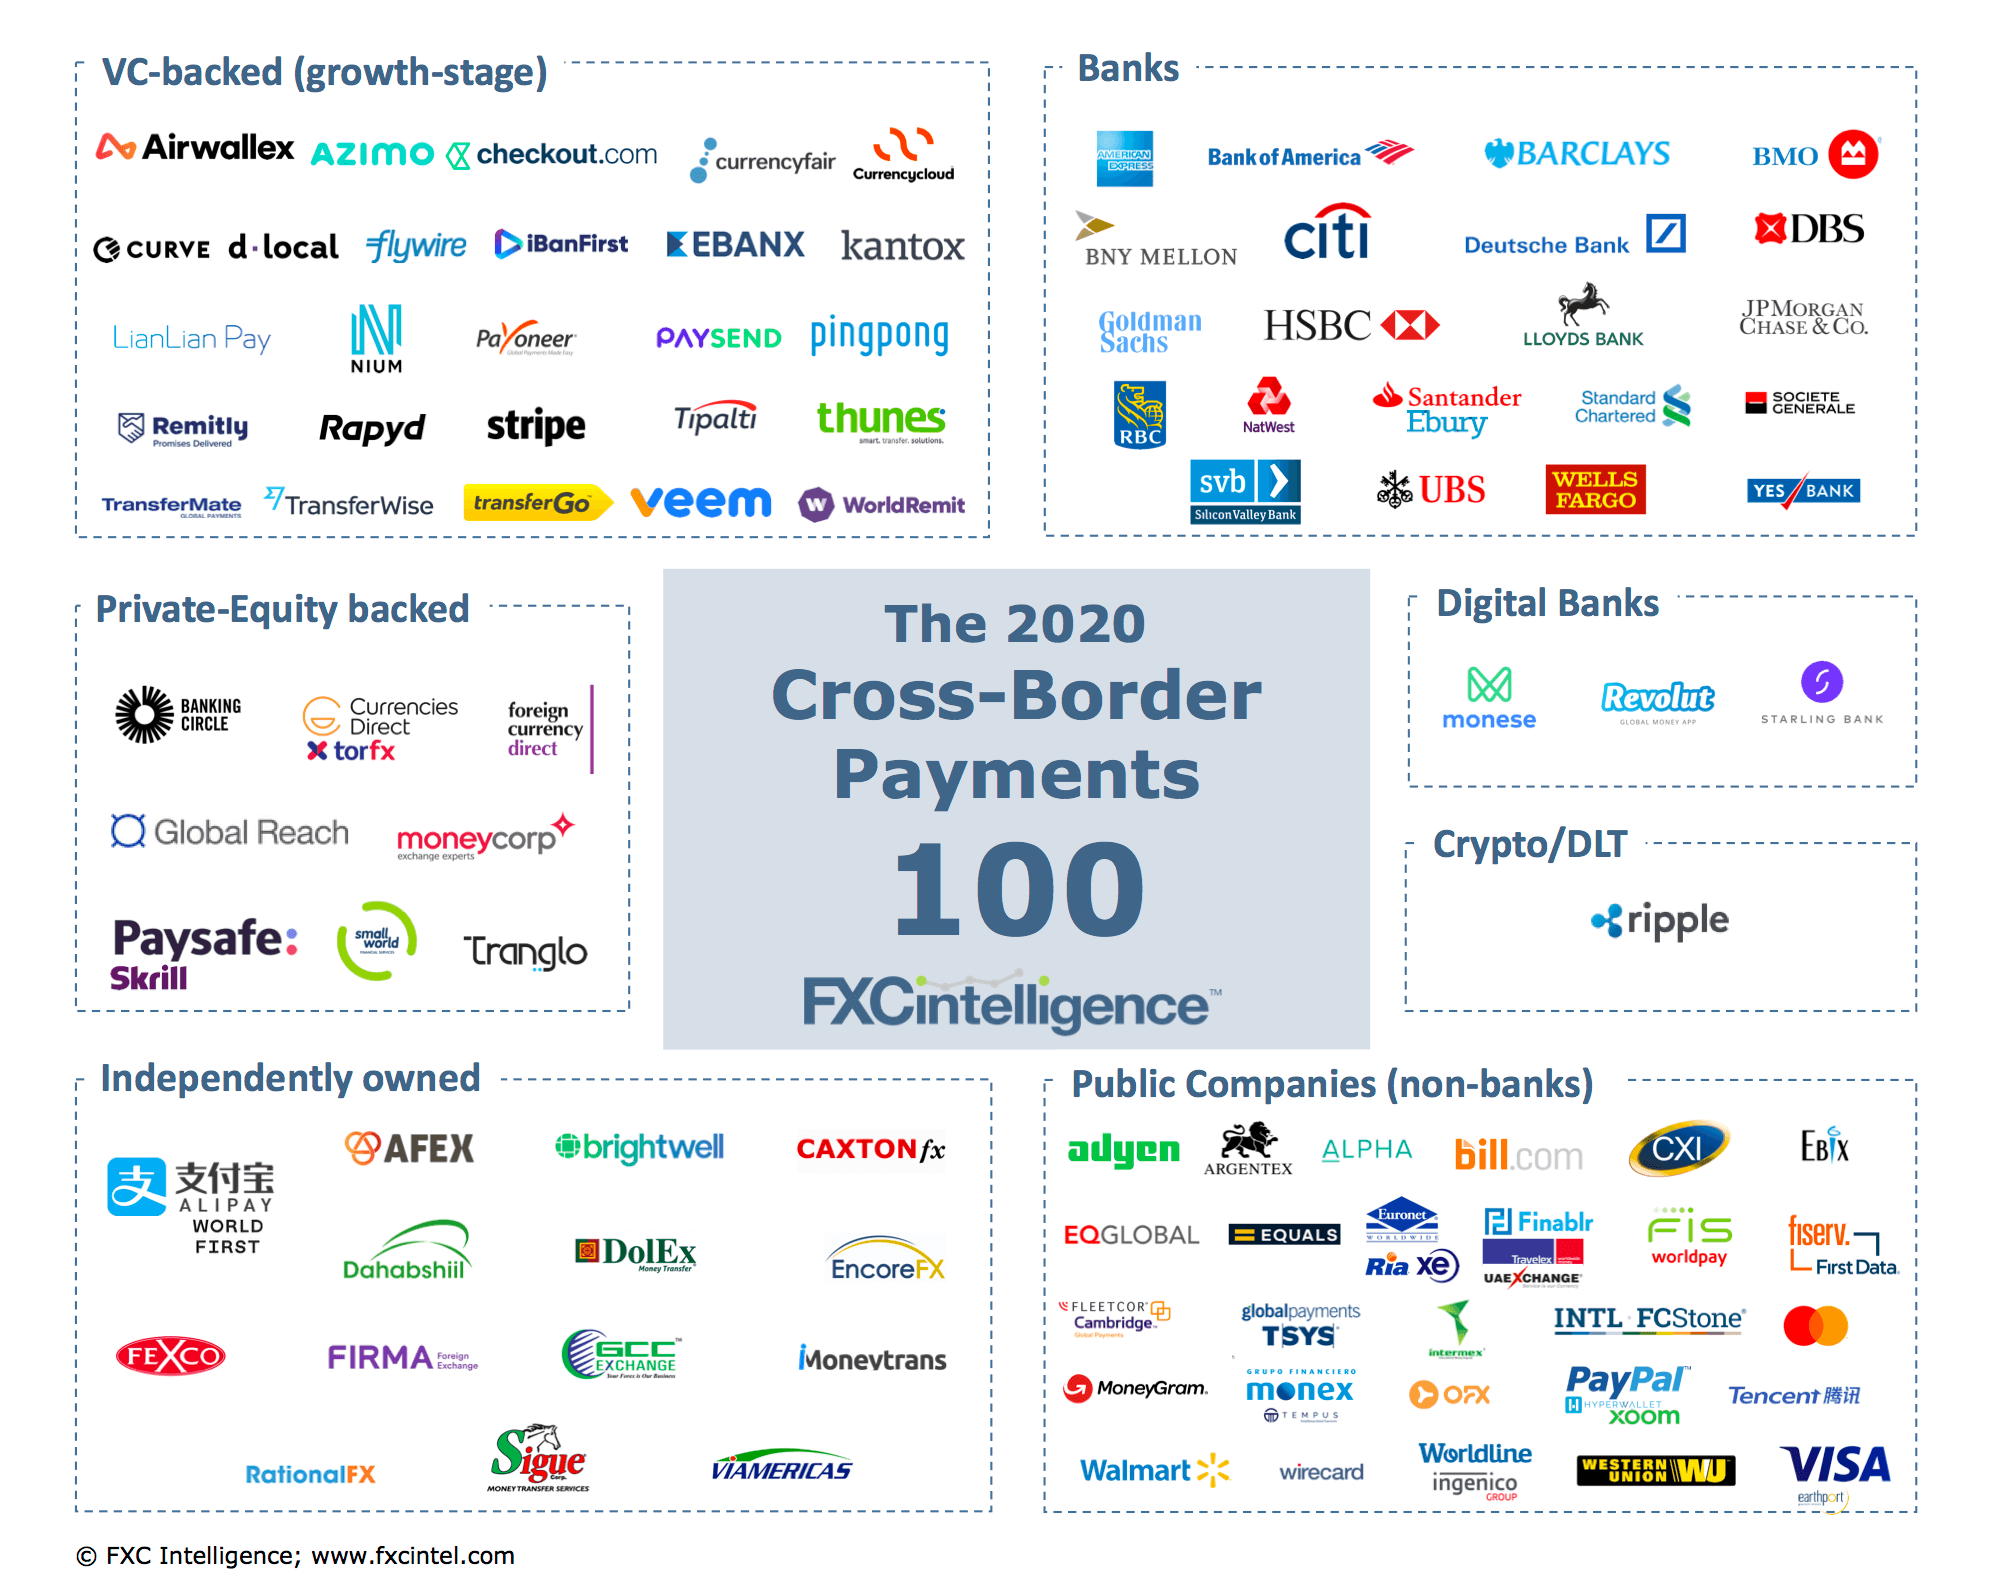 The 2020 Cross-Border Payments 100 market map from FXC Intelligence